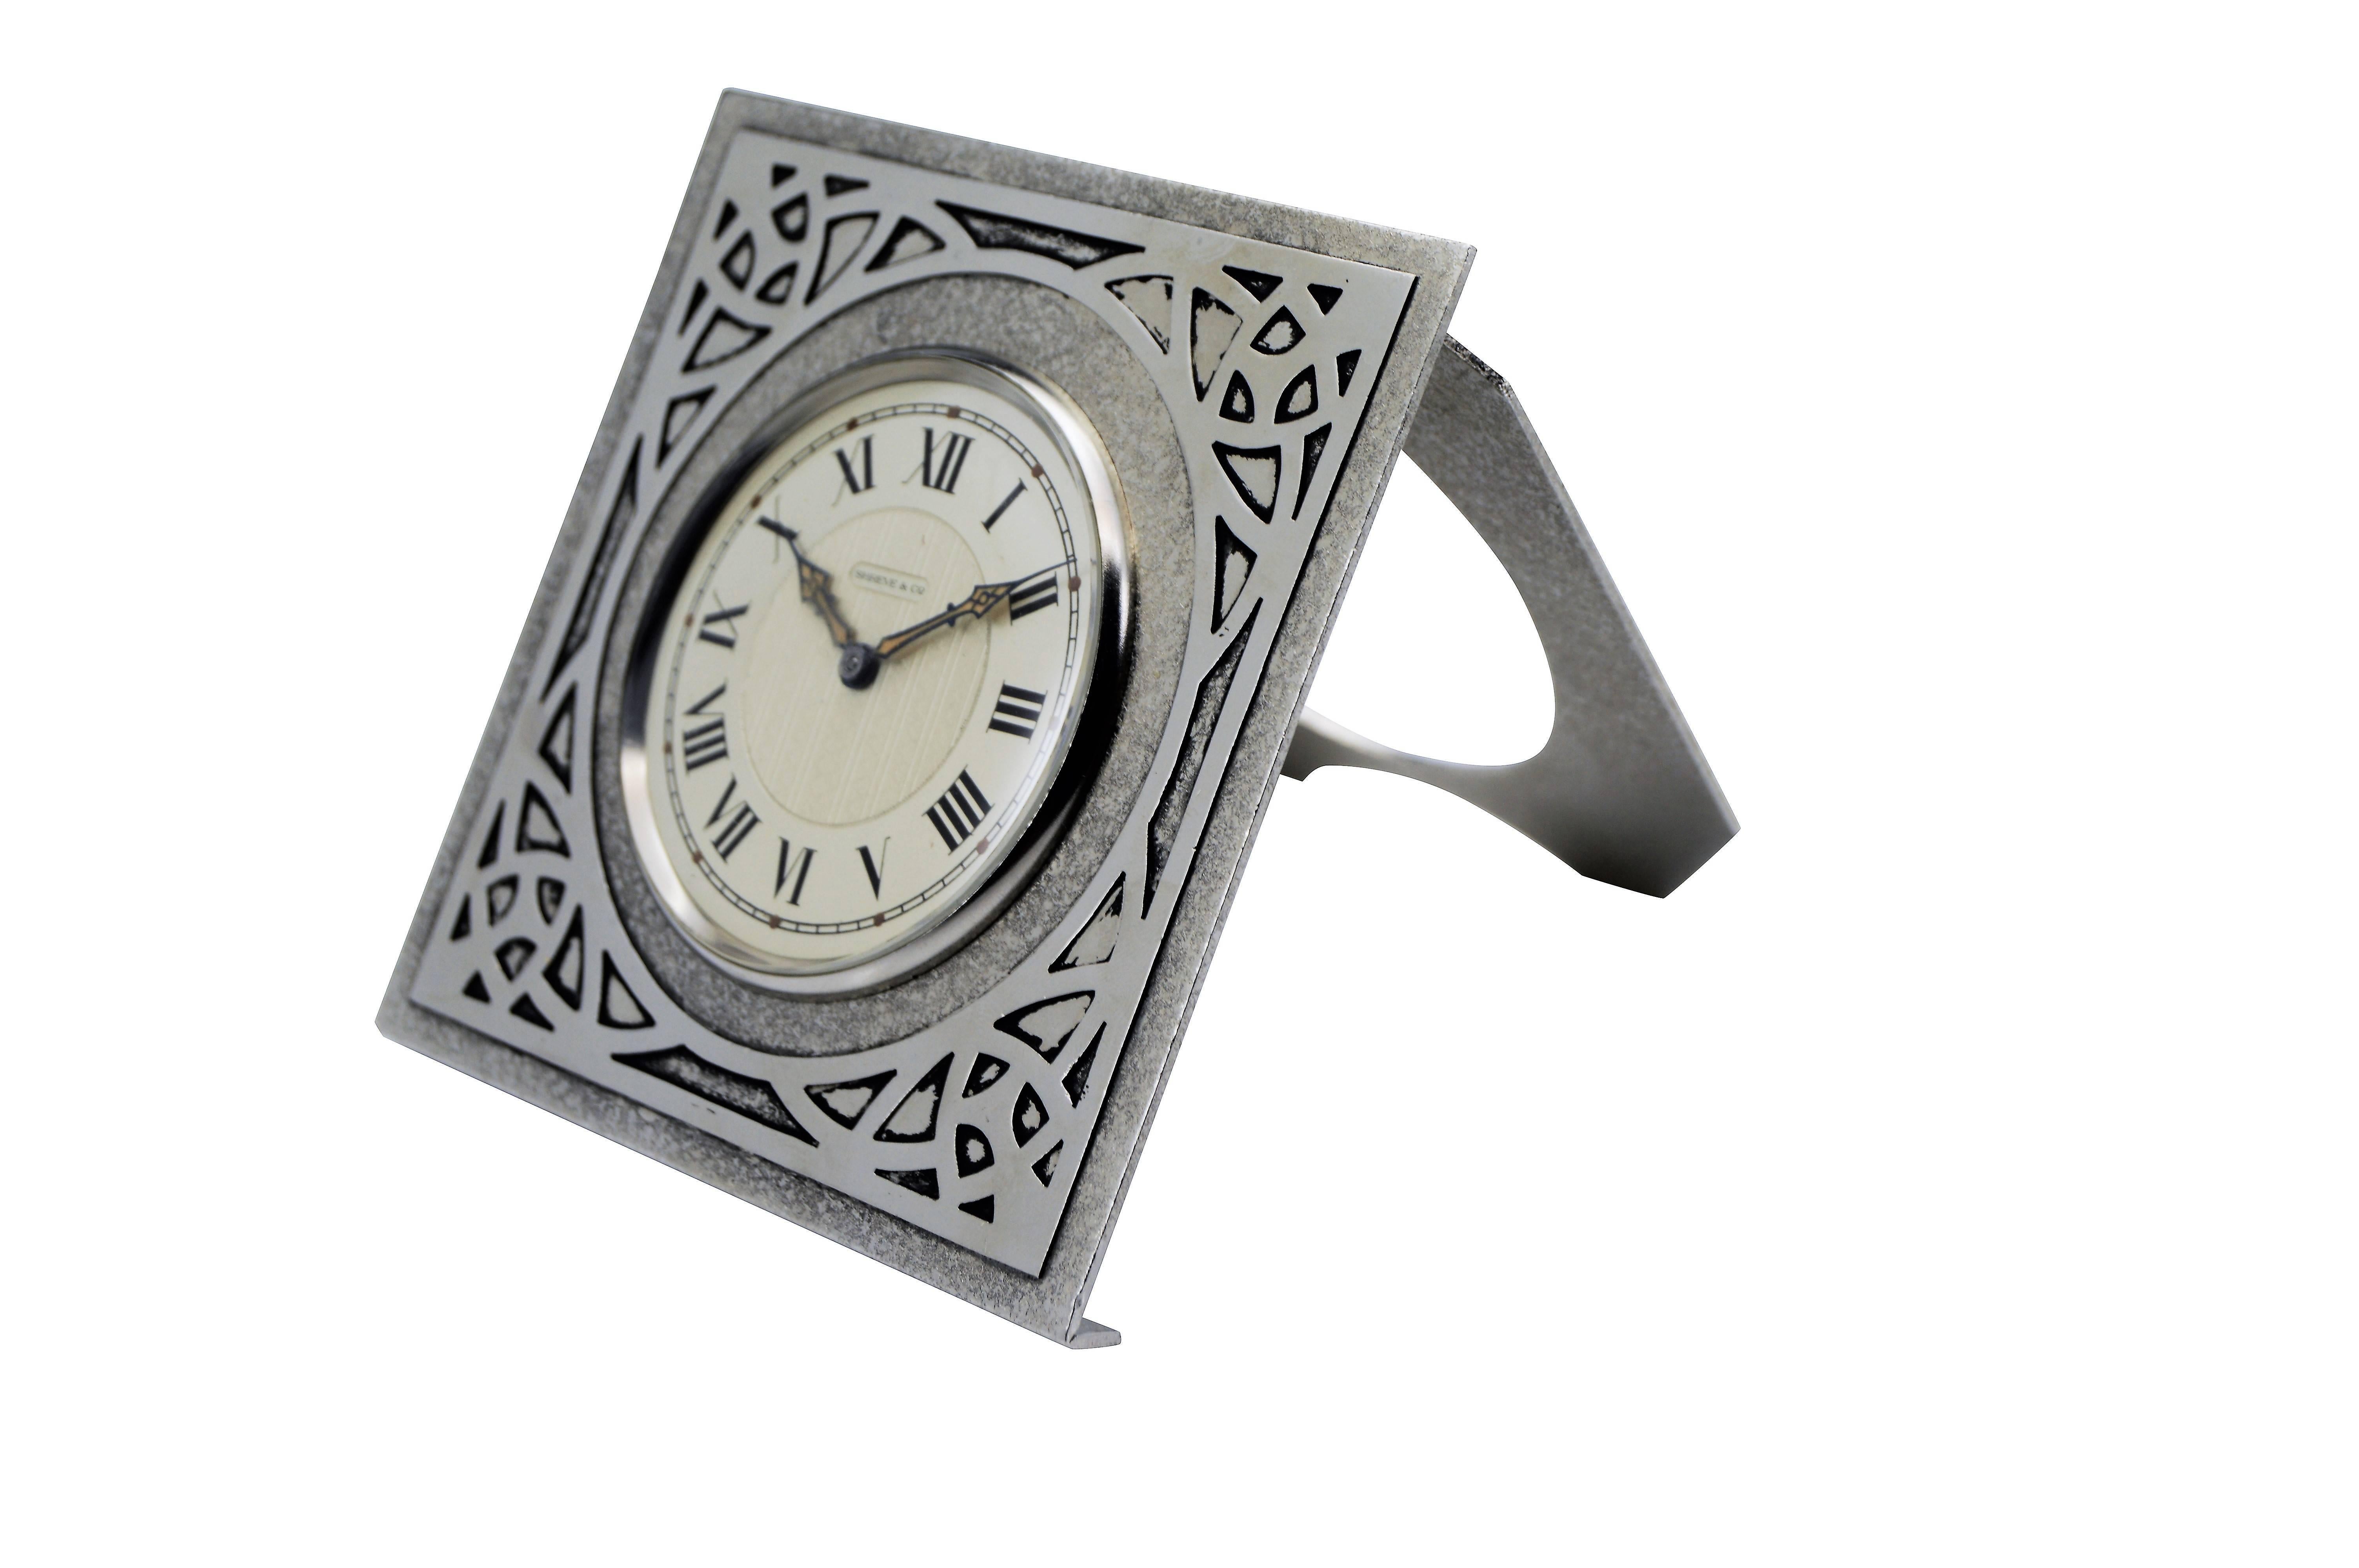 FACTORY / HOUSE: Shreve & Co.
STYLE / REFERENCE: Arts and Crafts Desk Clock
MOVEMENT / CALIBER: 8 Day
DIAL / HANDS: Silvered with Blued Steel Luminous Hands
DIMENSIONS: 4 Inches X 4 Inches
WARRANTY: 18 months on the movement.

LIFETIME SERVICE